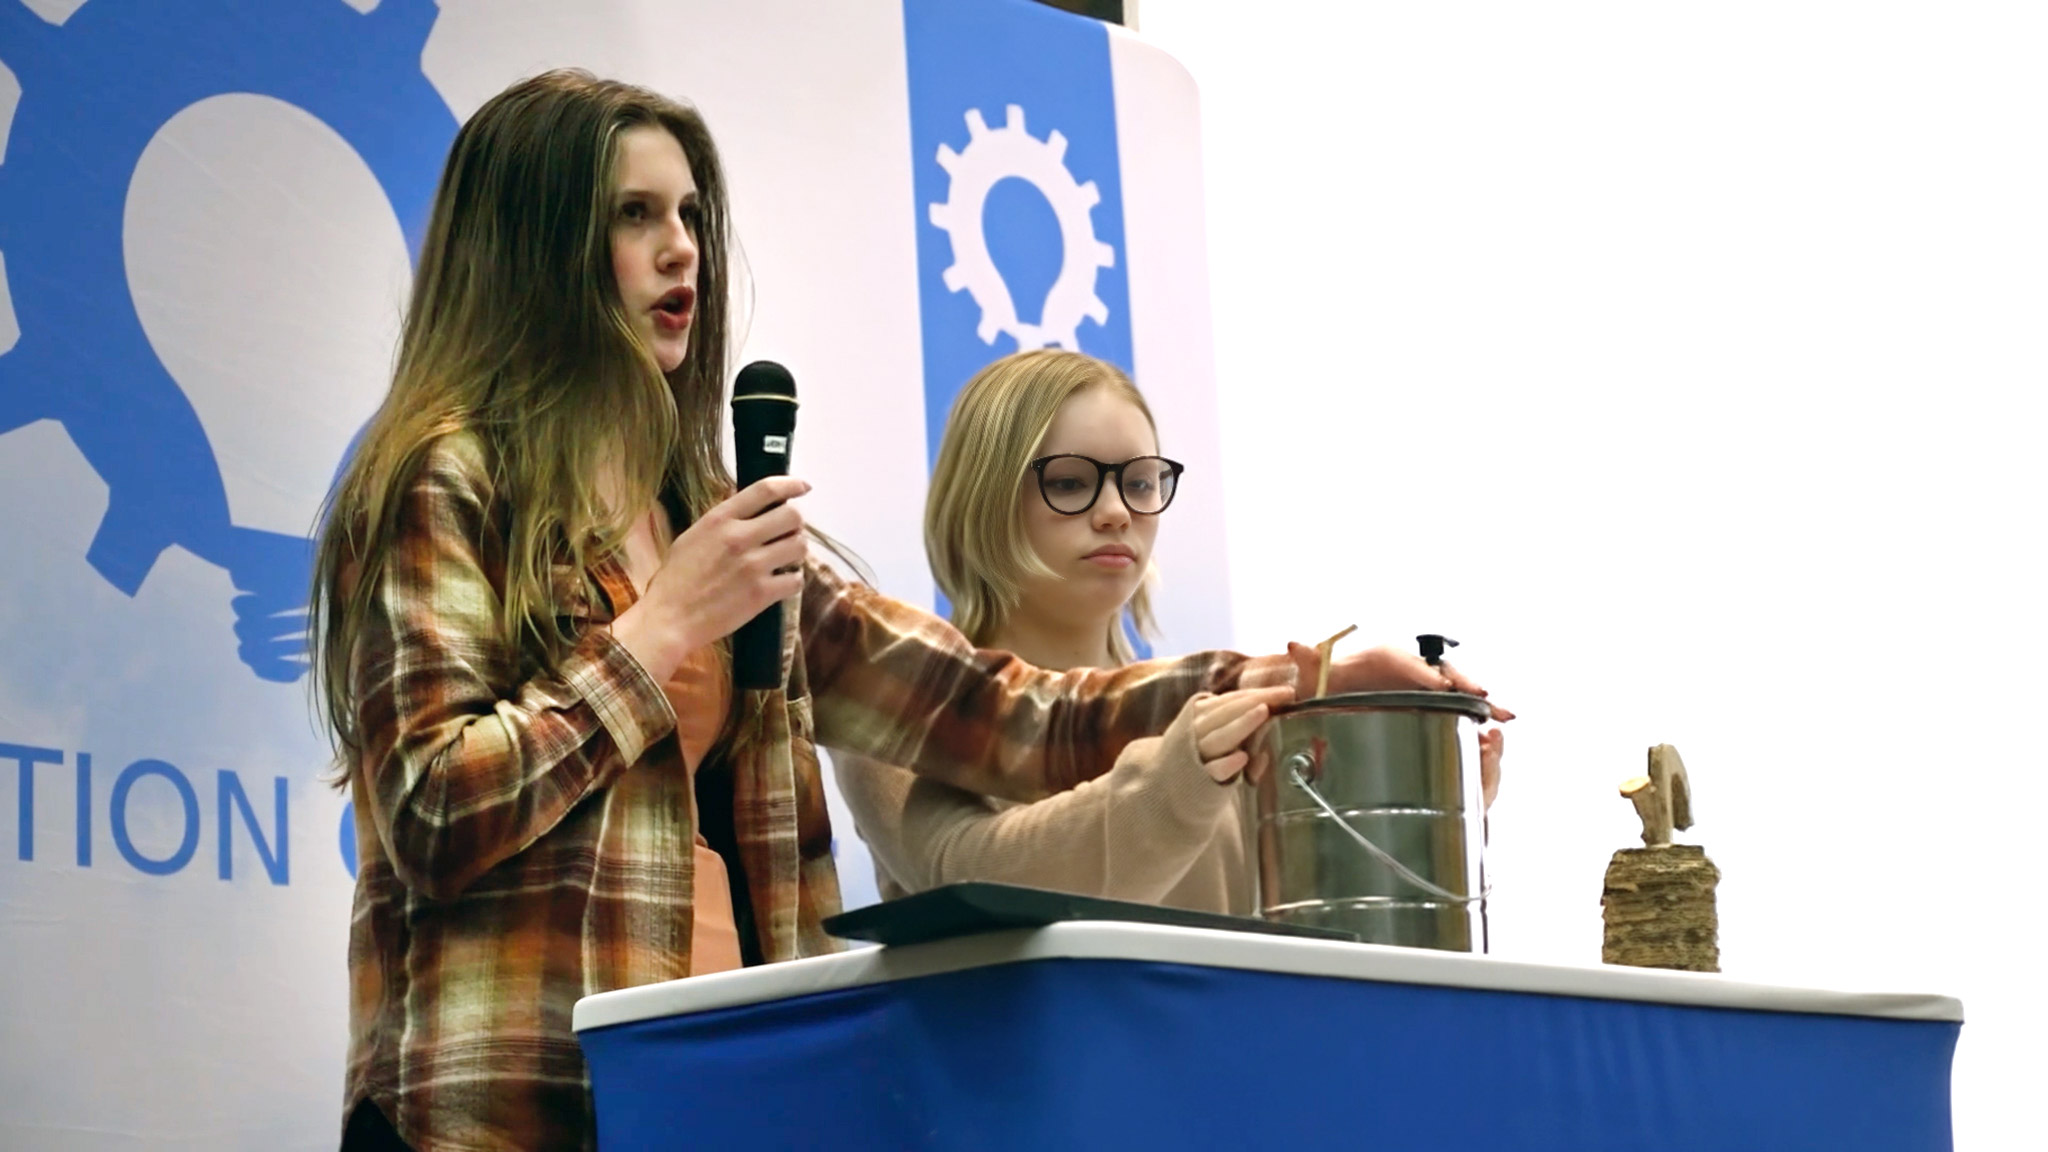 Students at an Invention Contest